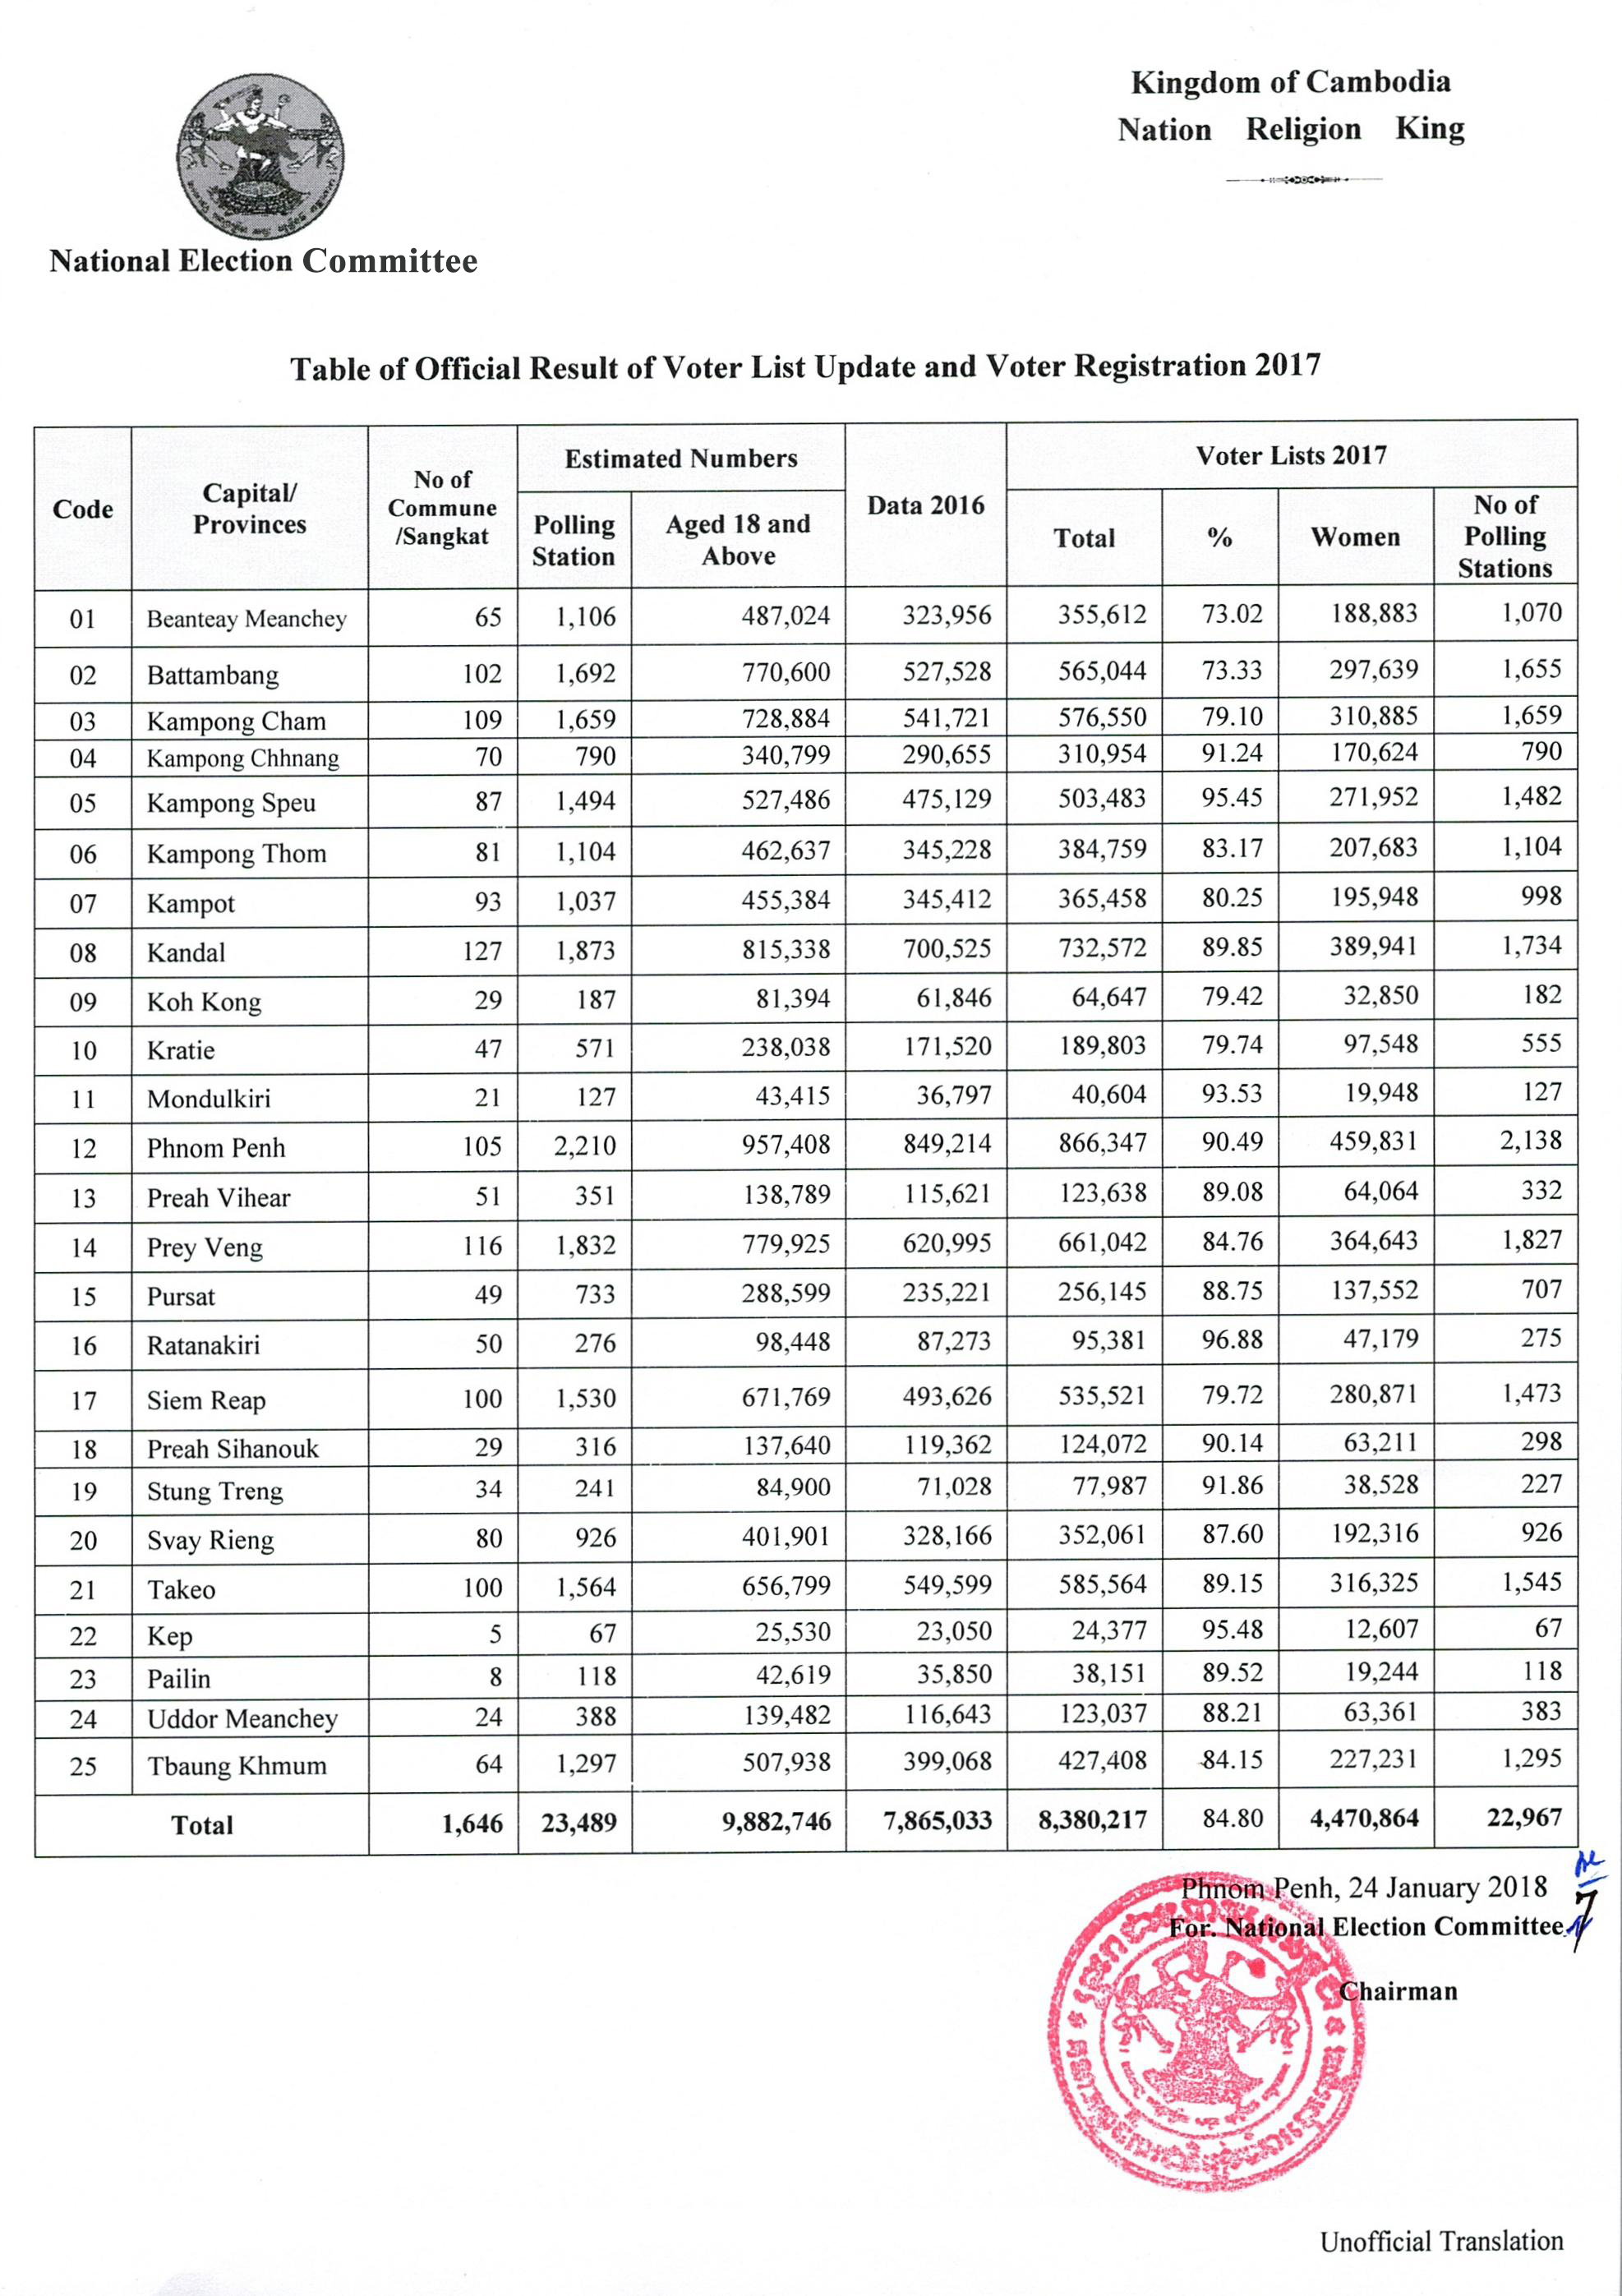 Table of Official Result of Voter List Update and Voter Registration